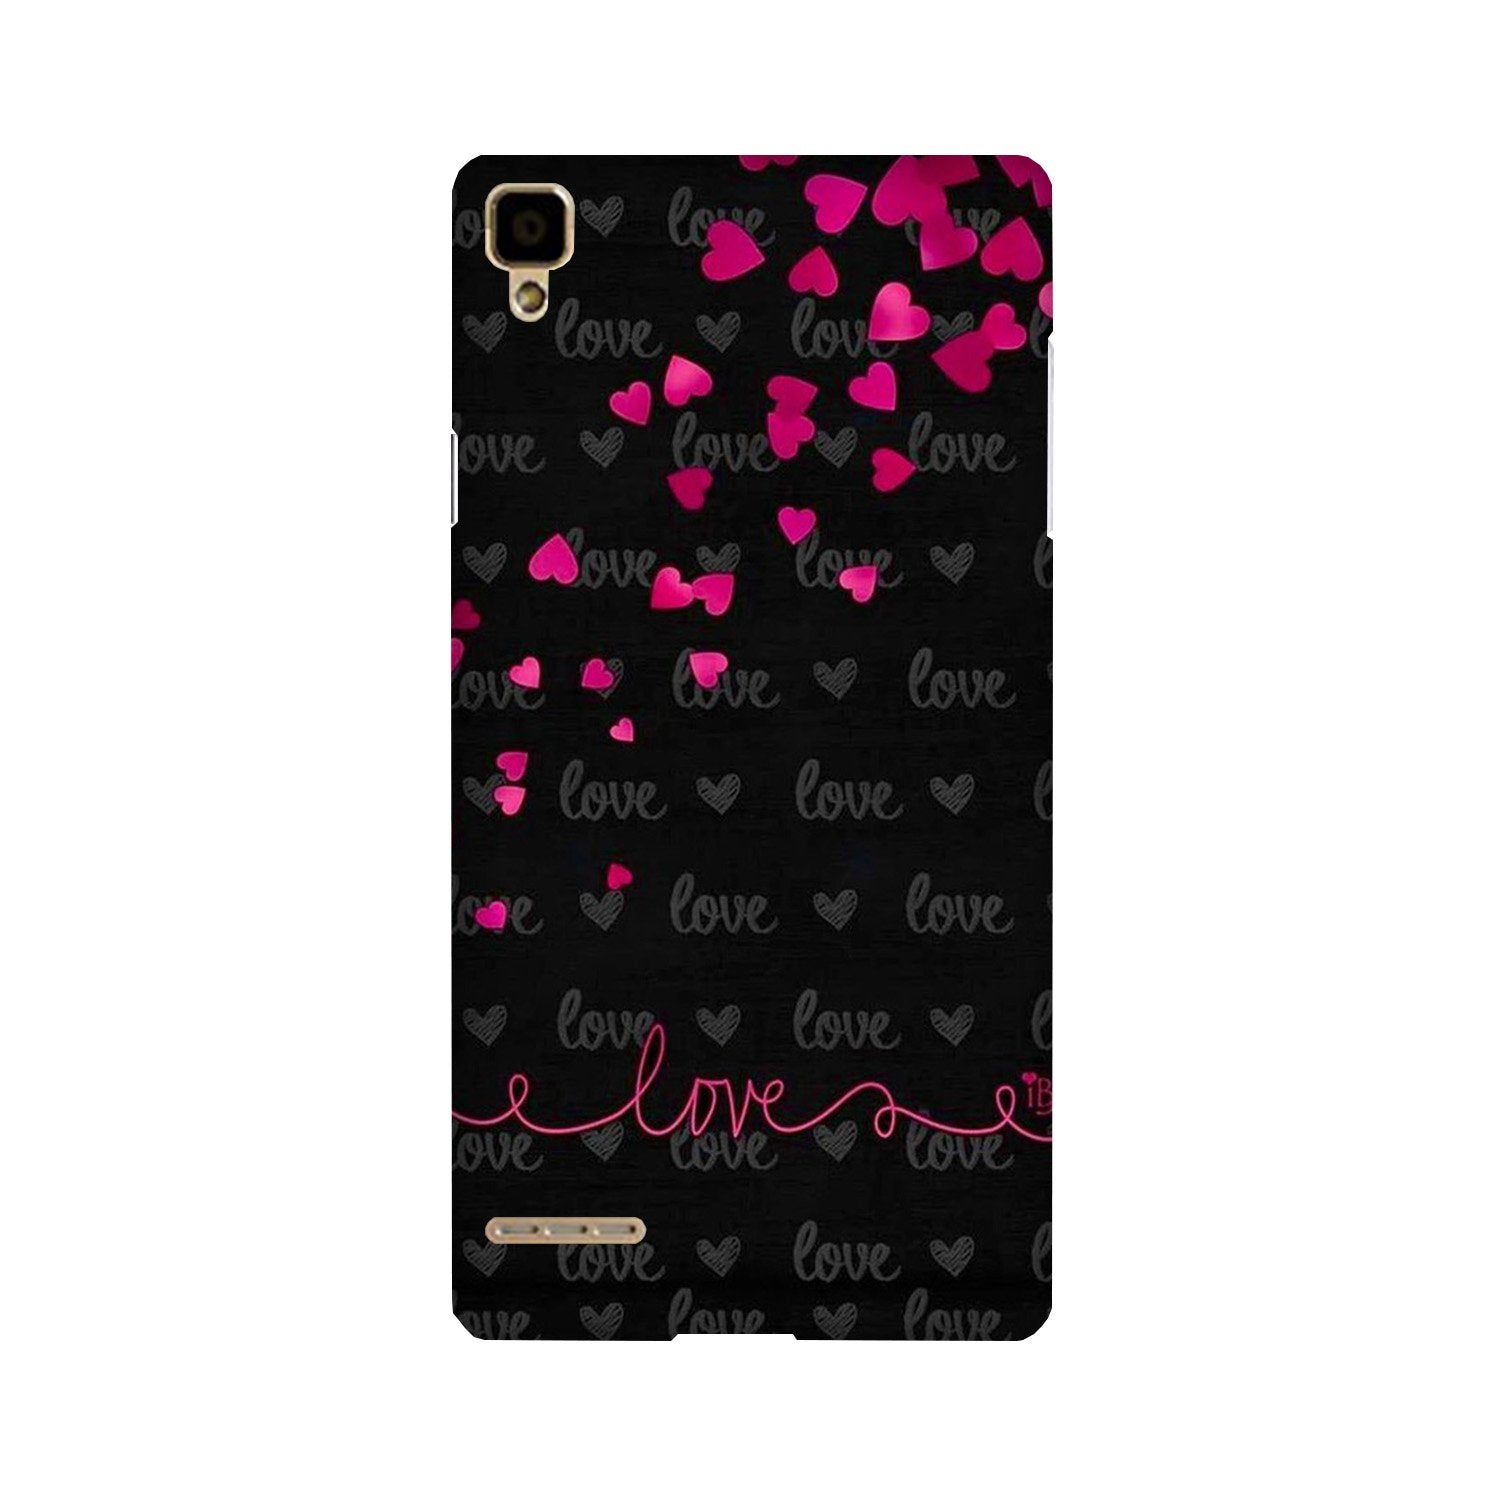 Love in Air Case for Oppo F1